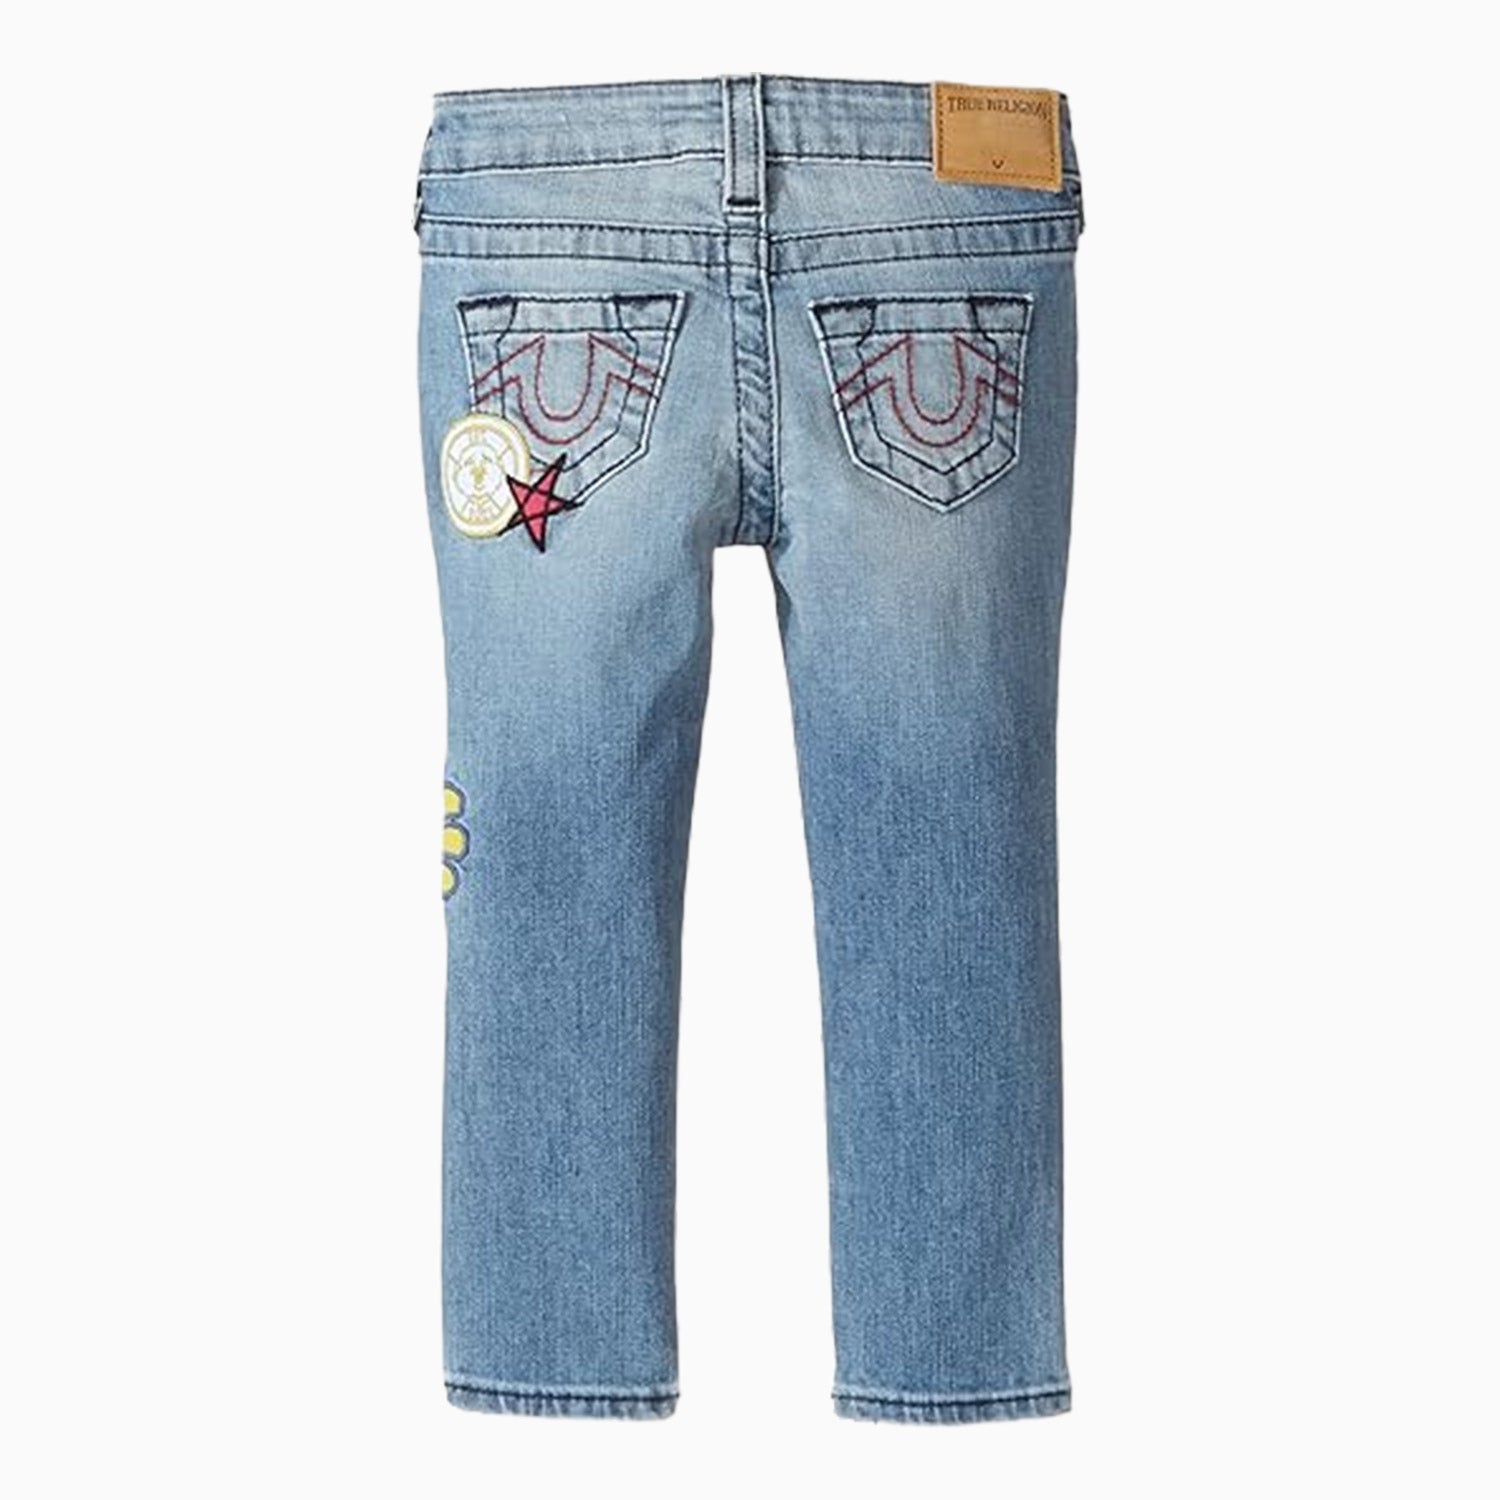 true-religion-kids-casey-patched-jean-pant-tr817jn37